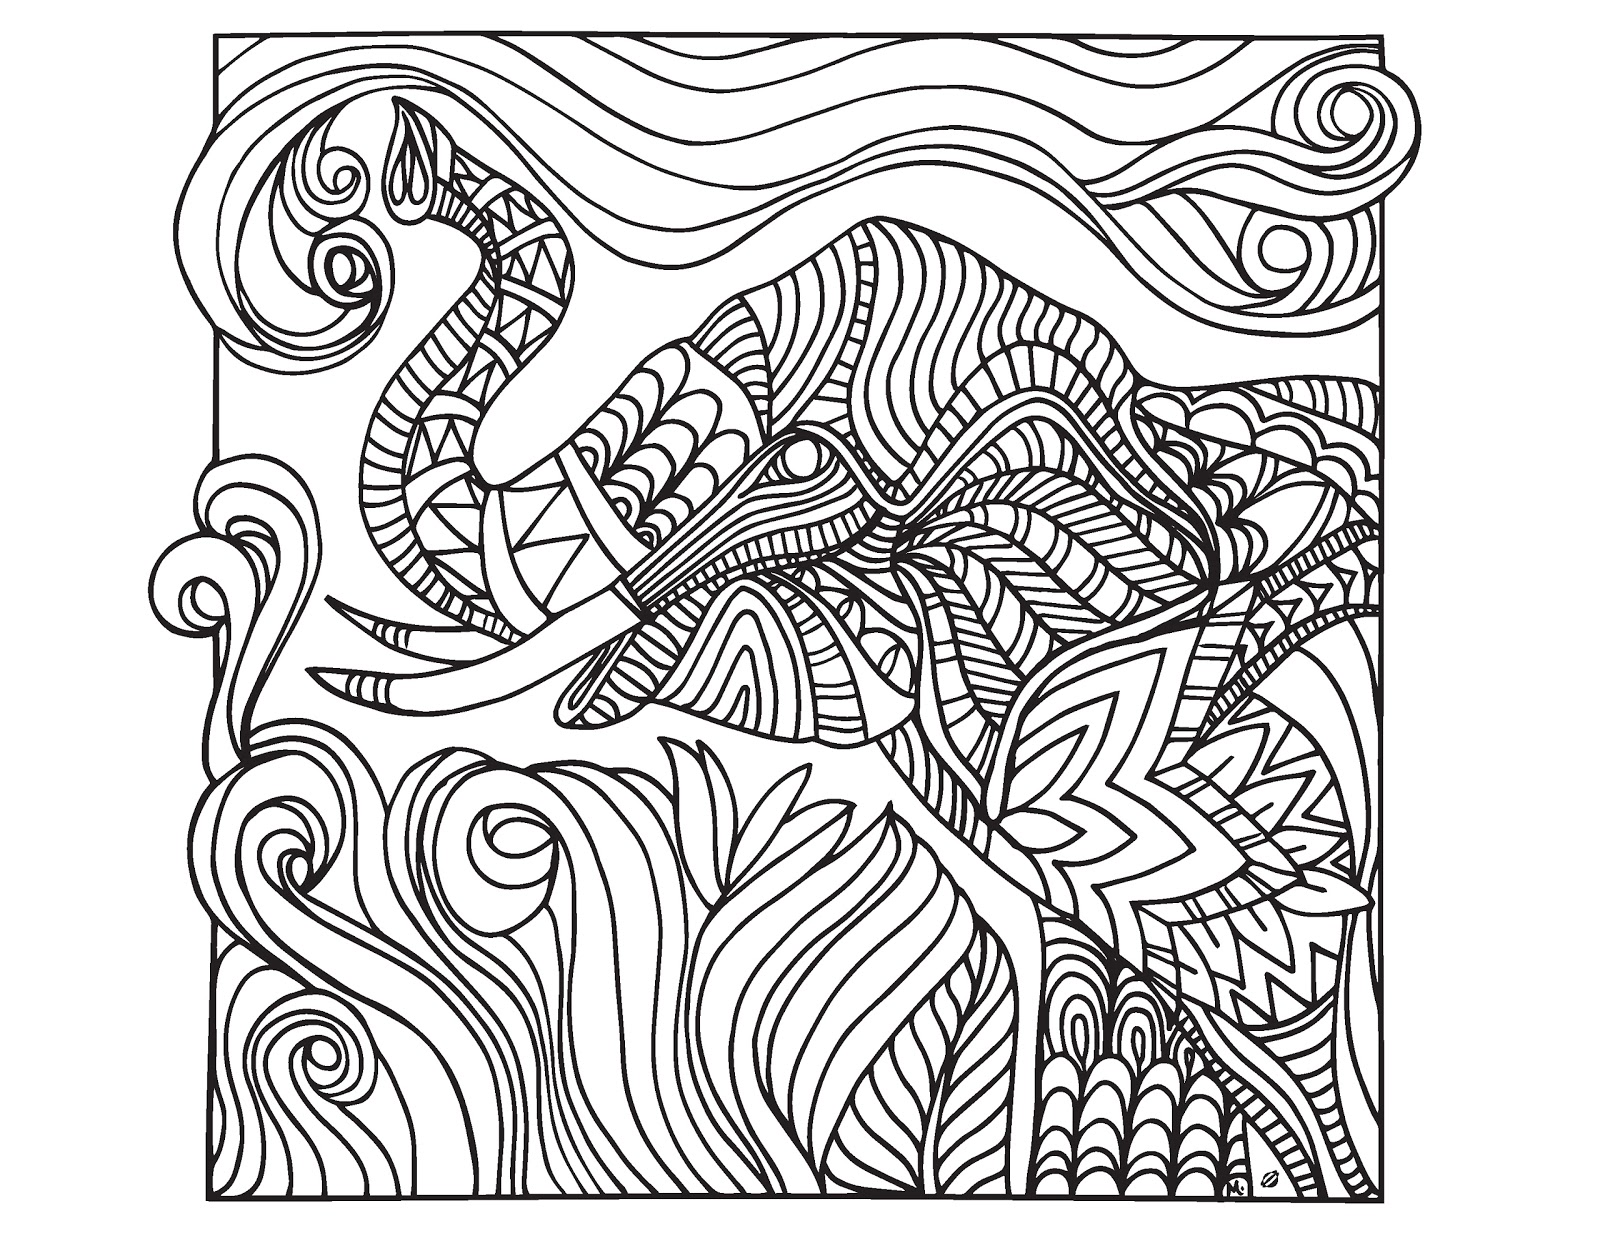 Free Coloring Pages Of Grown Up Sheet Coloring Wallpapers Download Free Images Wallpaper [coloring876.blogspot.com]